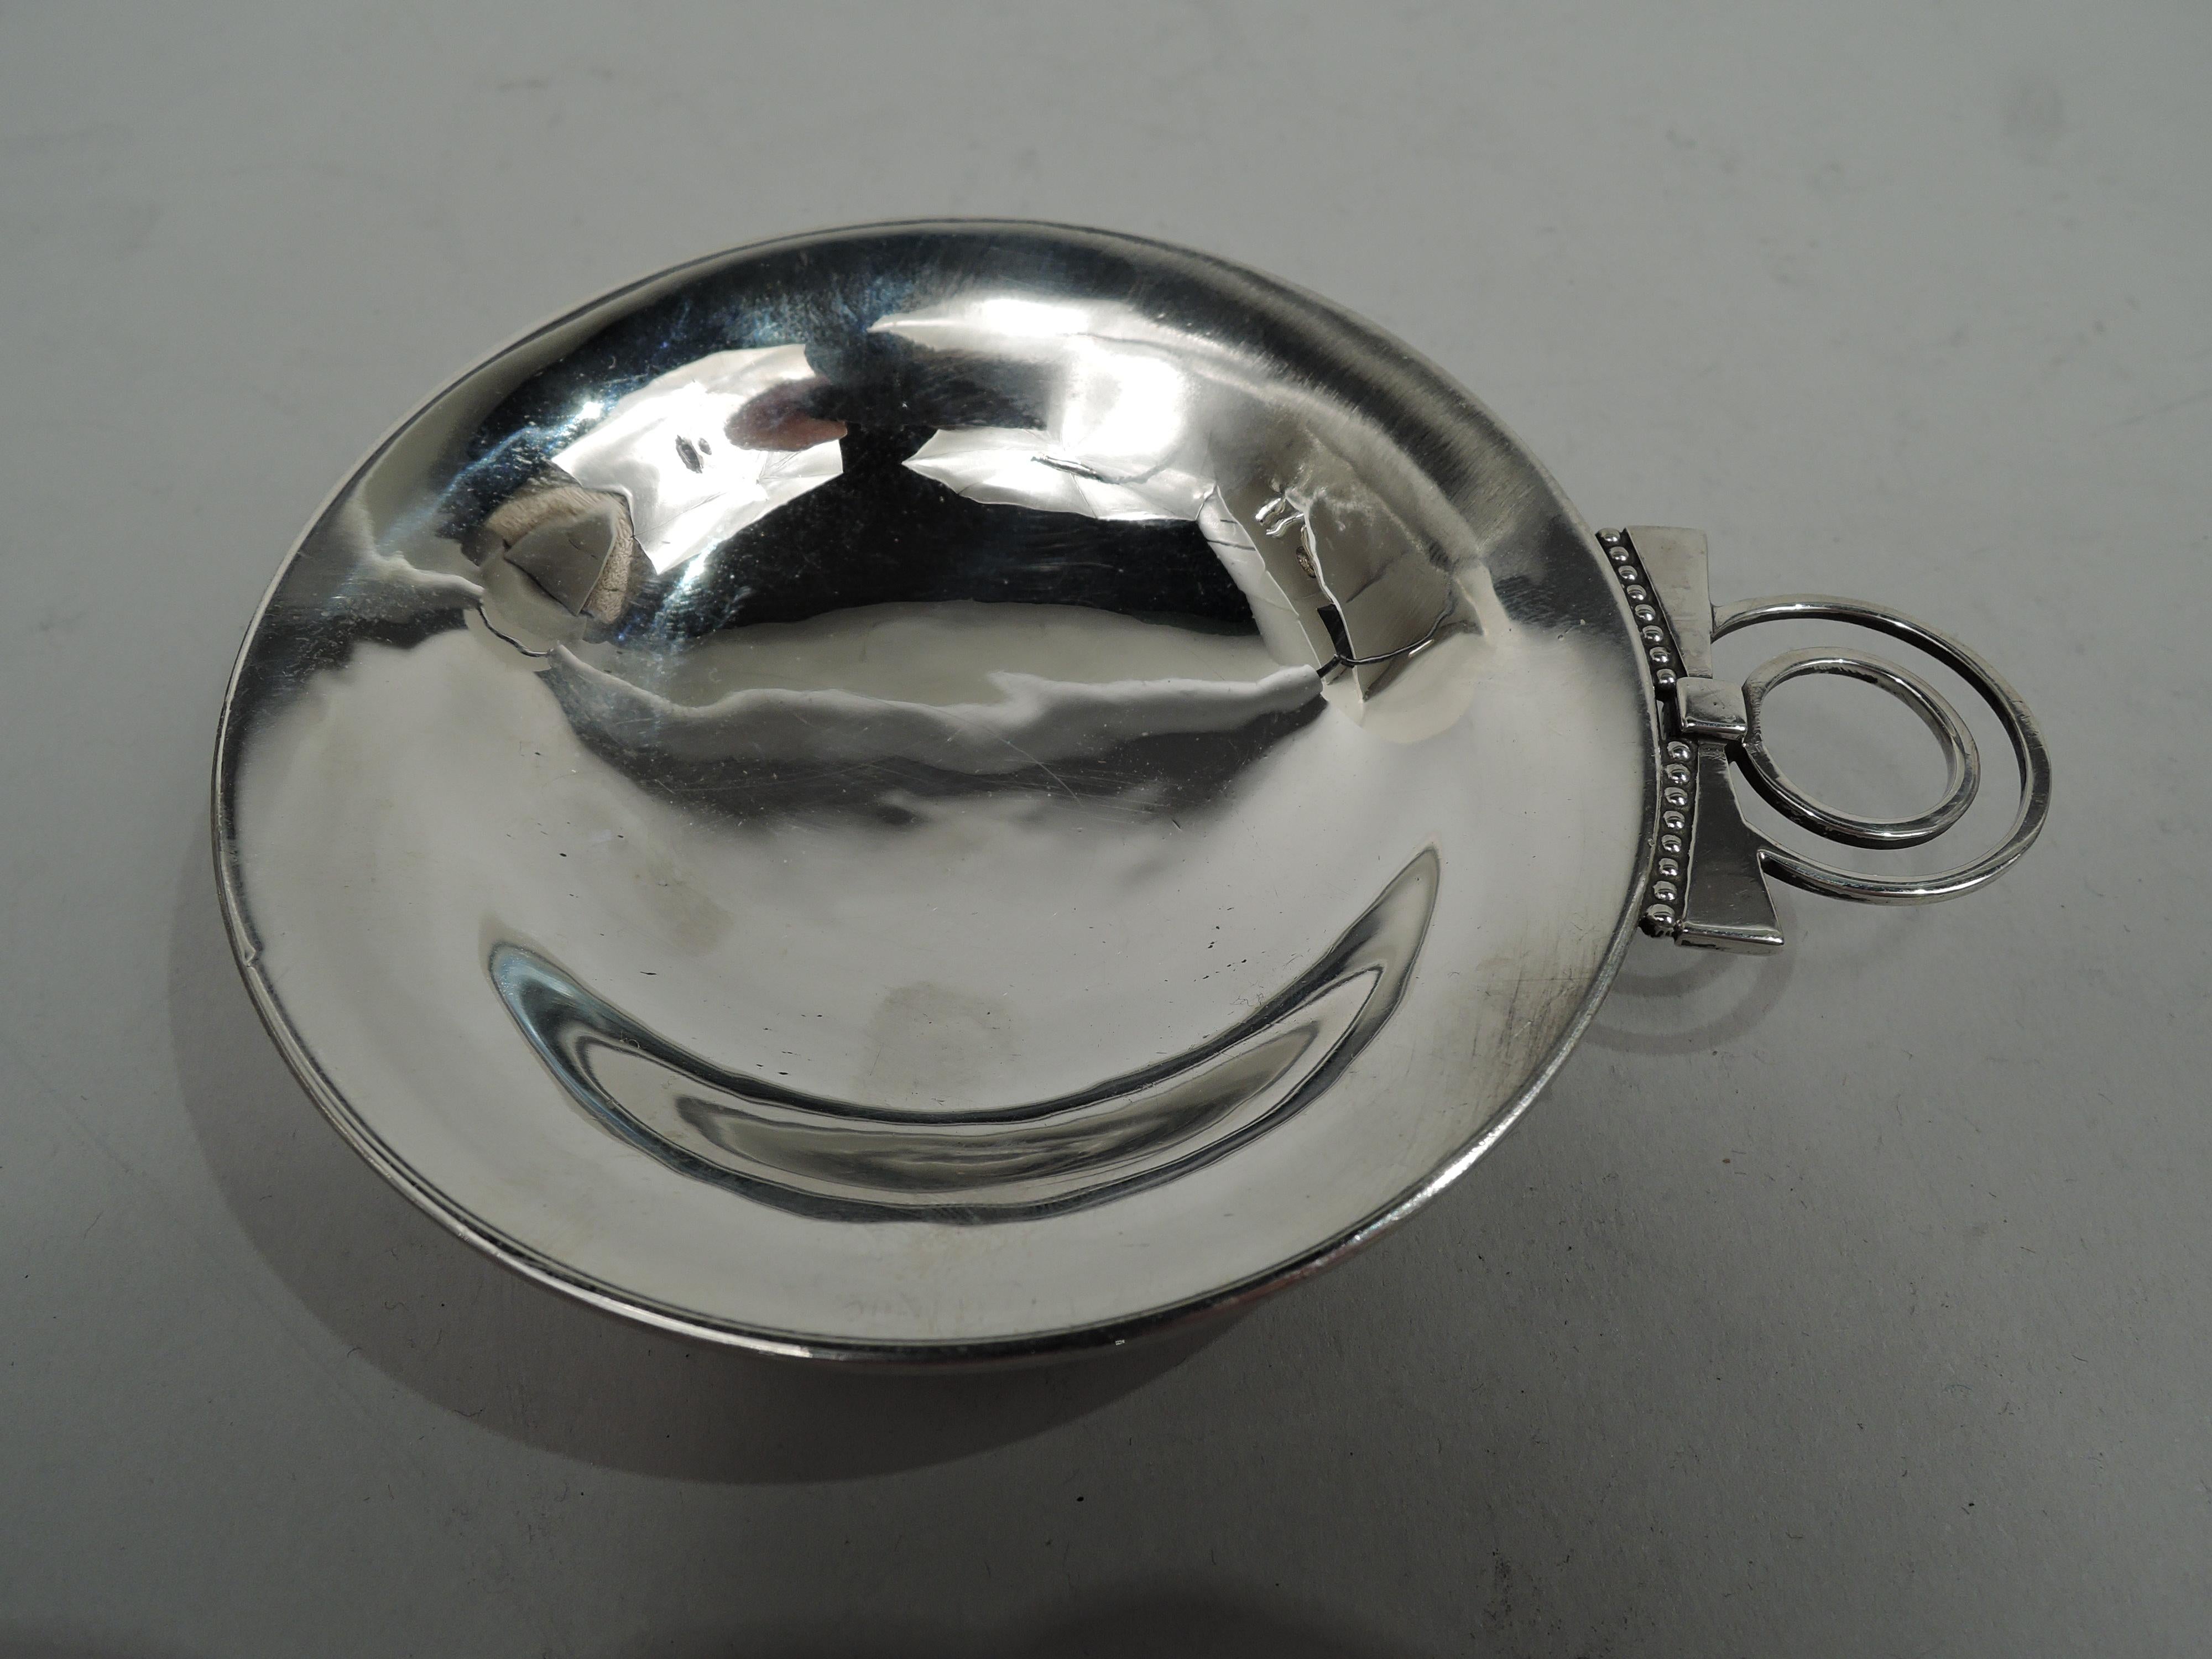 Edward VIII sterling silver vide-poche. Made by Charles Boyton in London in 1936. Round and shallow with beaded foot ring. Double concentric ring handle with beaded bowtie mount. Visible hand hammering. Fully marked. Weight: 2.5 troy ounces.